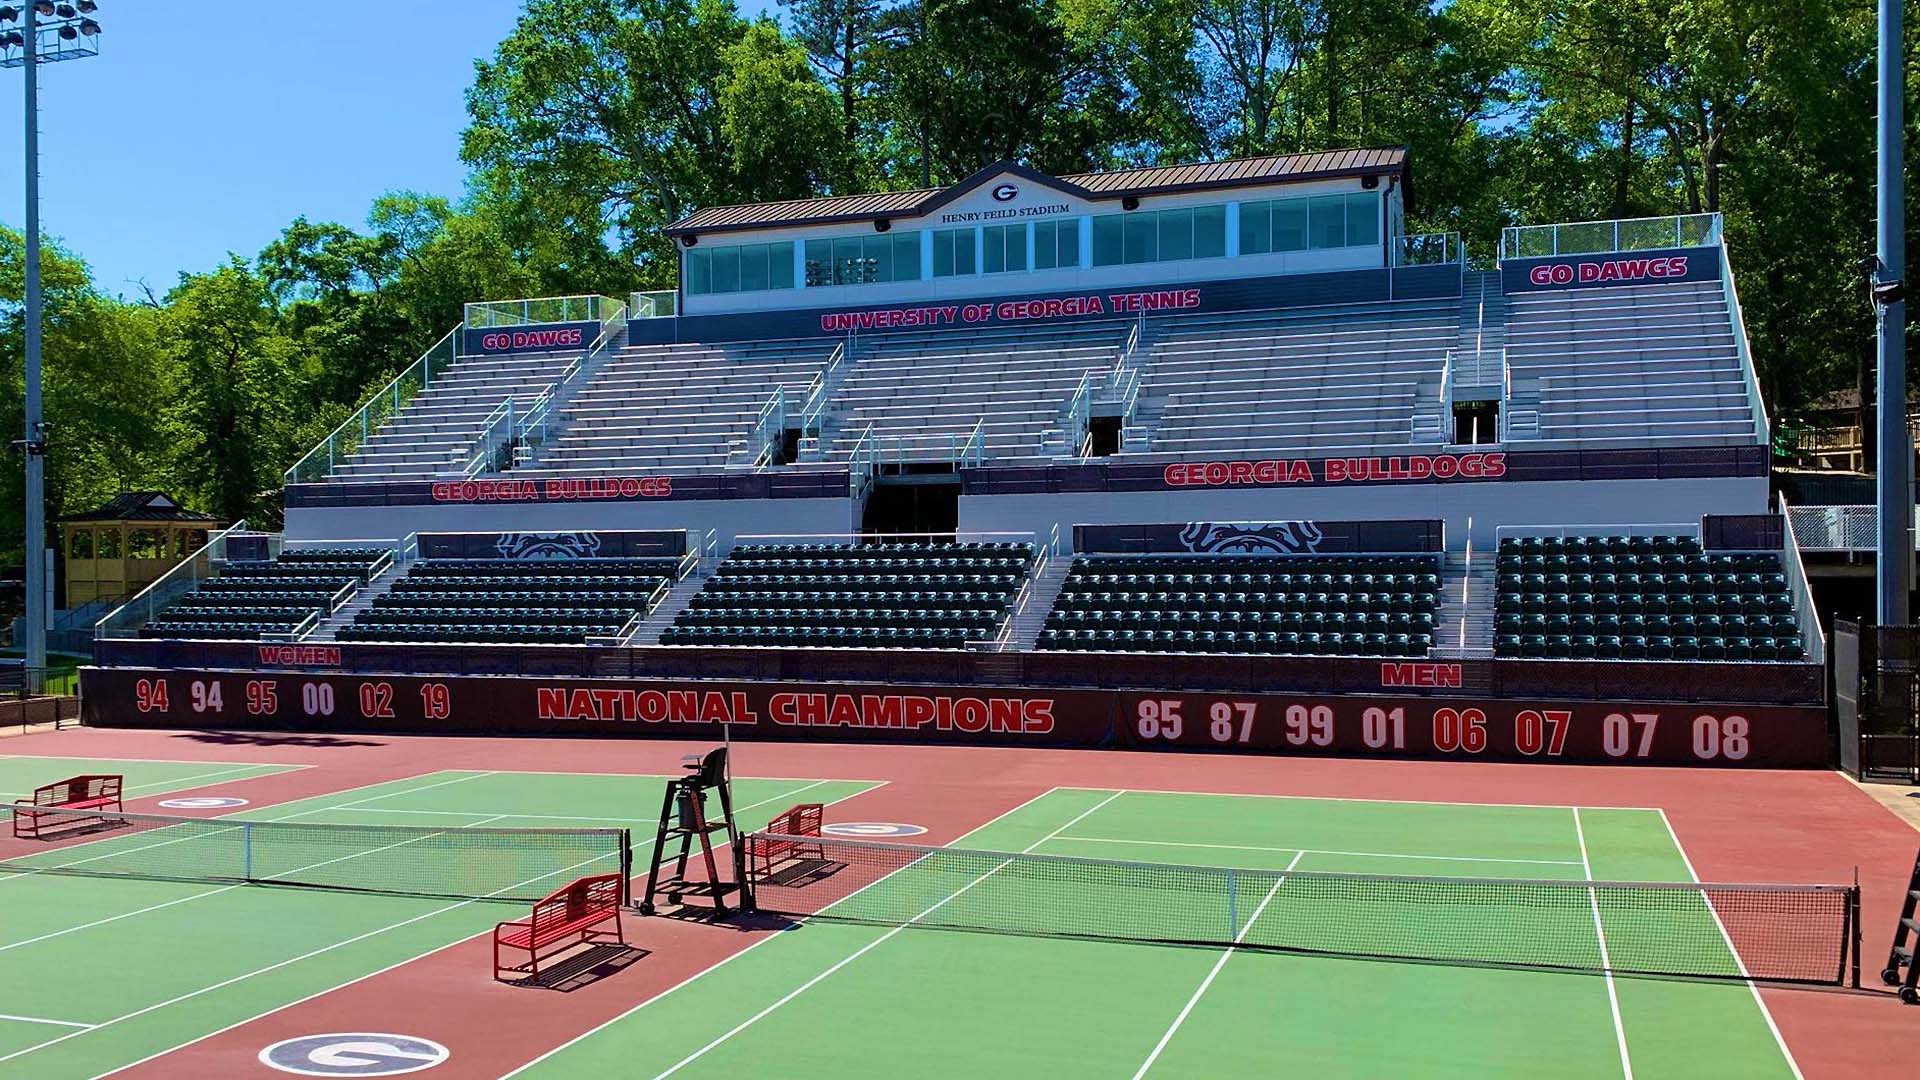 View of the grandstand tennis seating at Henry Feild Stadium.